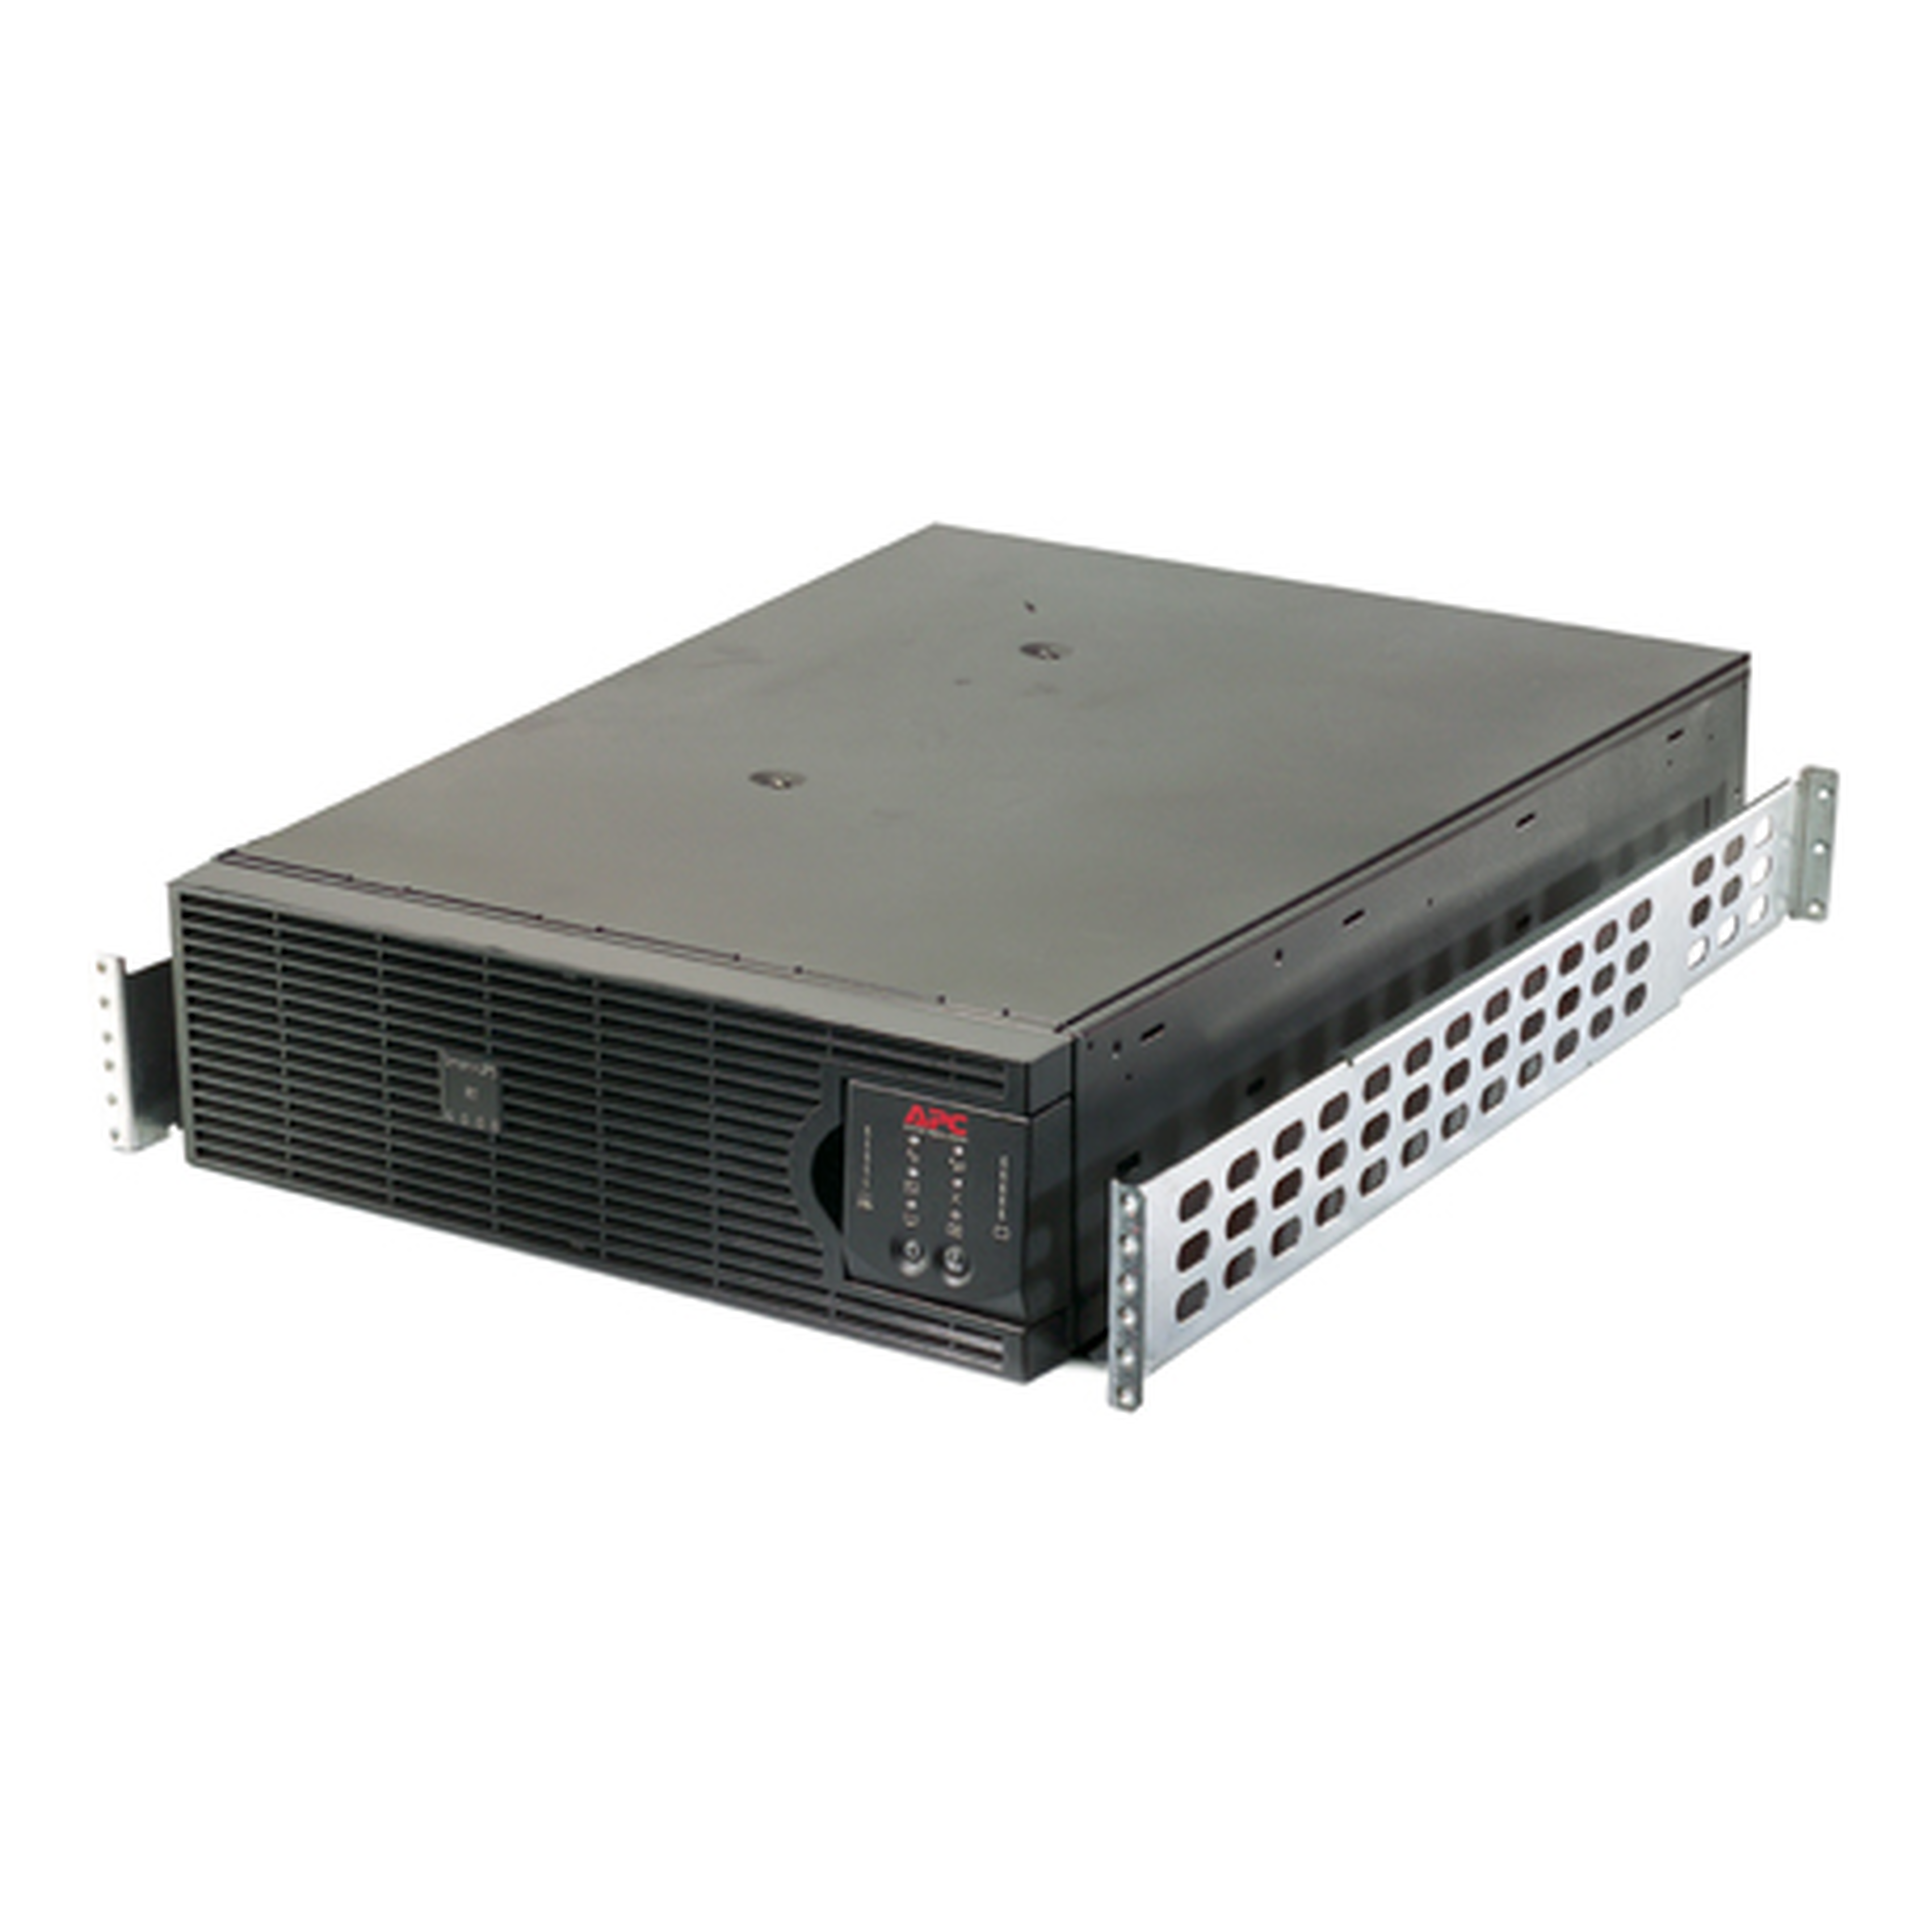 APC Smart-UPS RT 6kVA, 208V, Rack, 3U, 4x 5-20R, 1x L6-30R, 1x L14-30R NEMA outlets, with 208/240 (Split-Phase) to 120